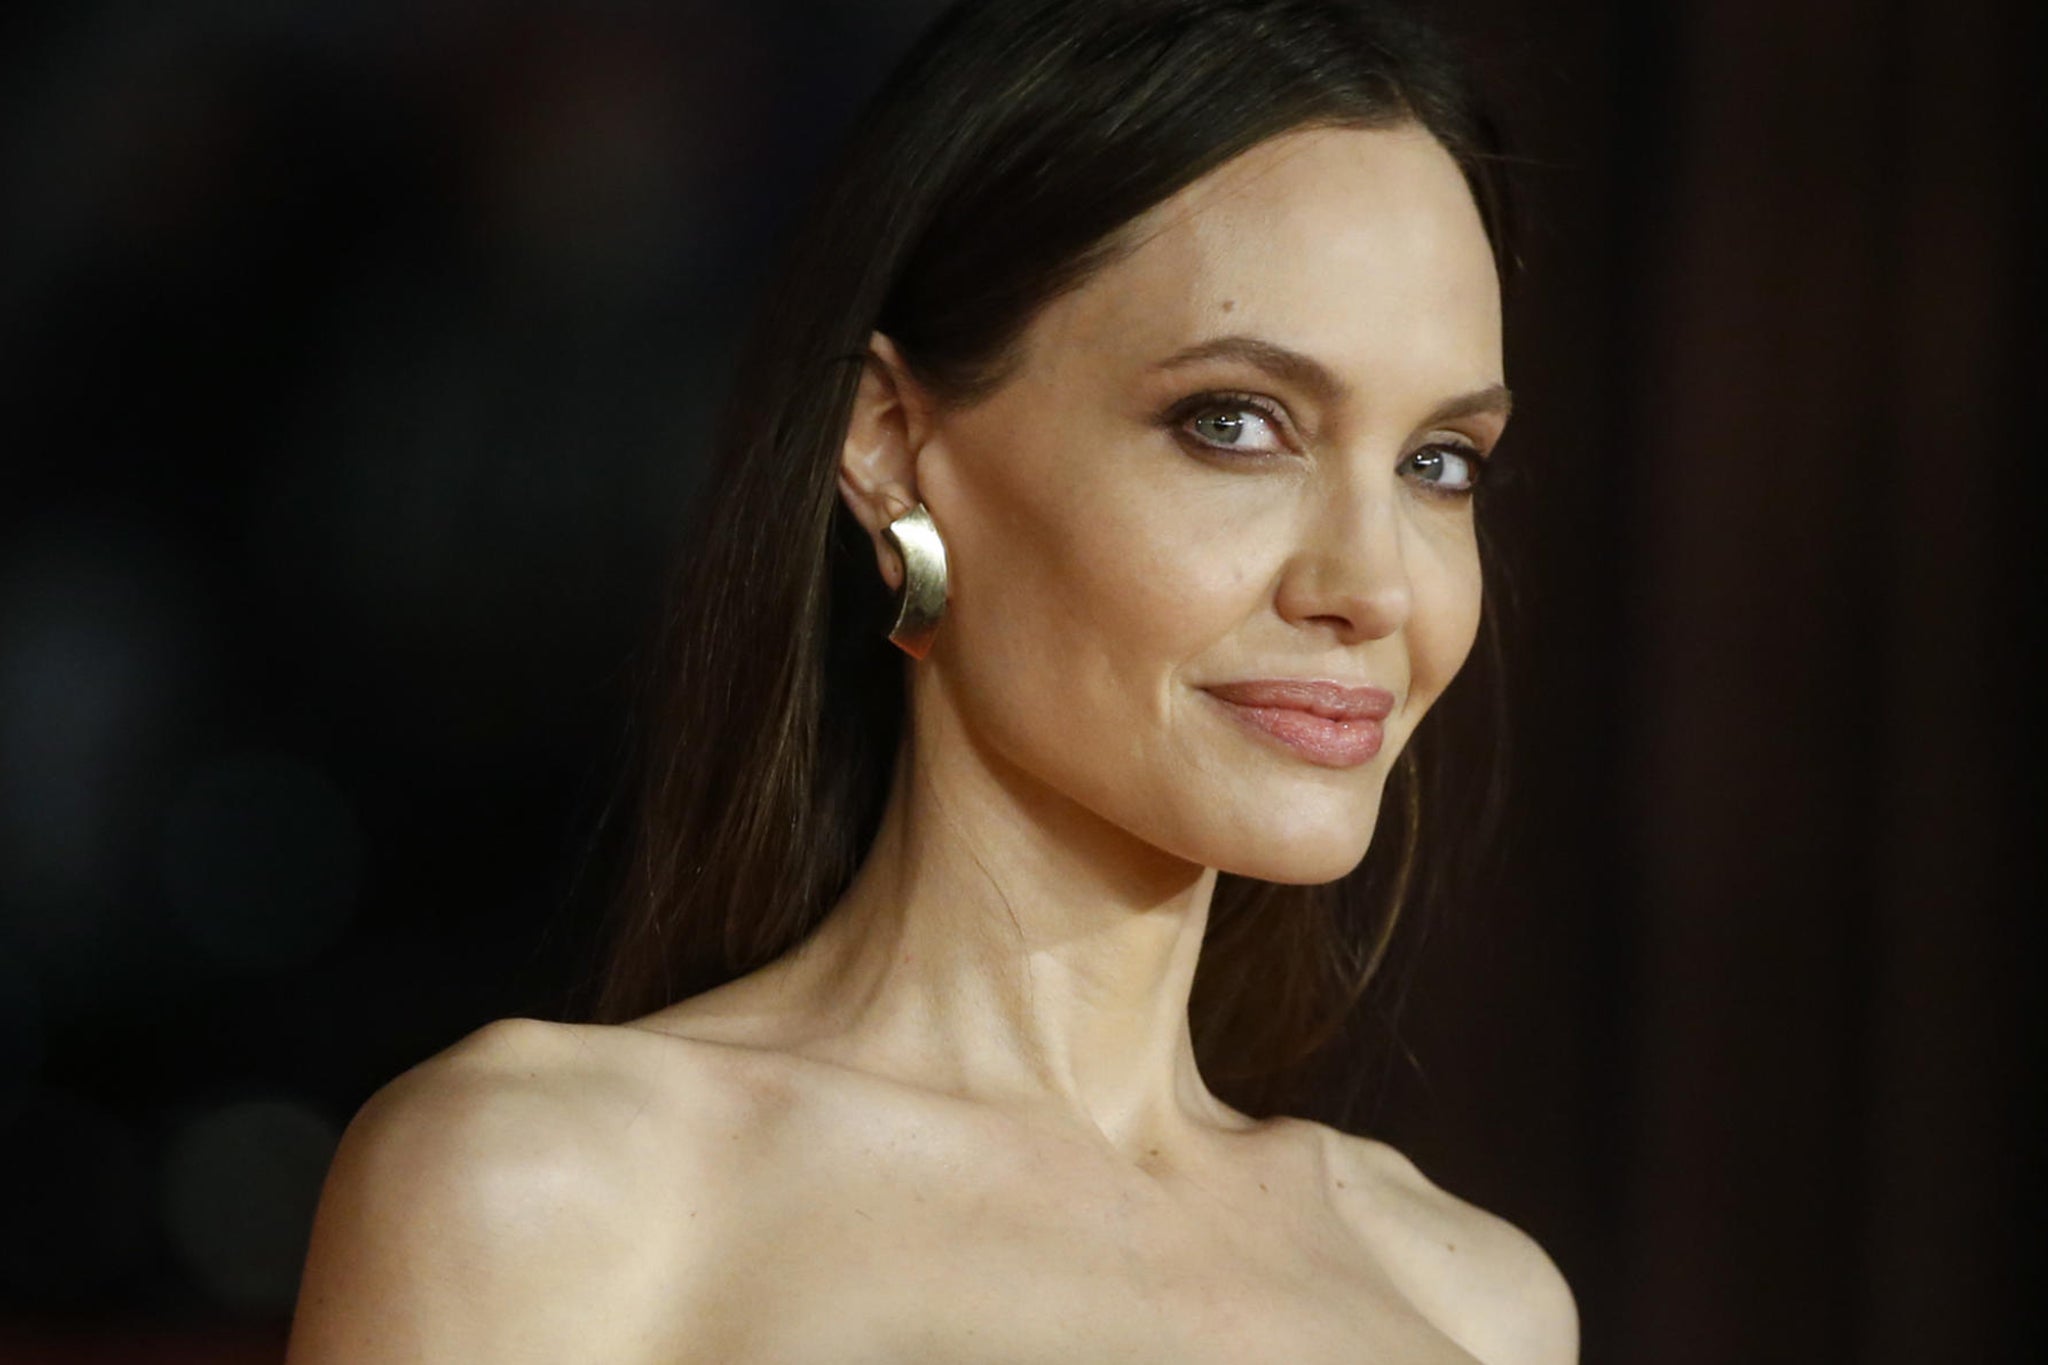 It has been a long time since fans and critics have had a major Angelina Jolie acting performance to watch